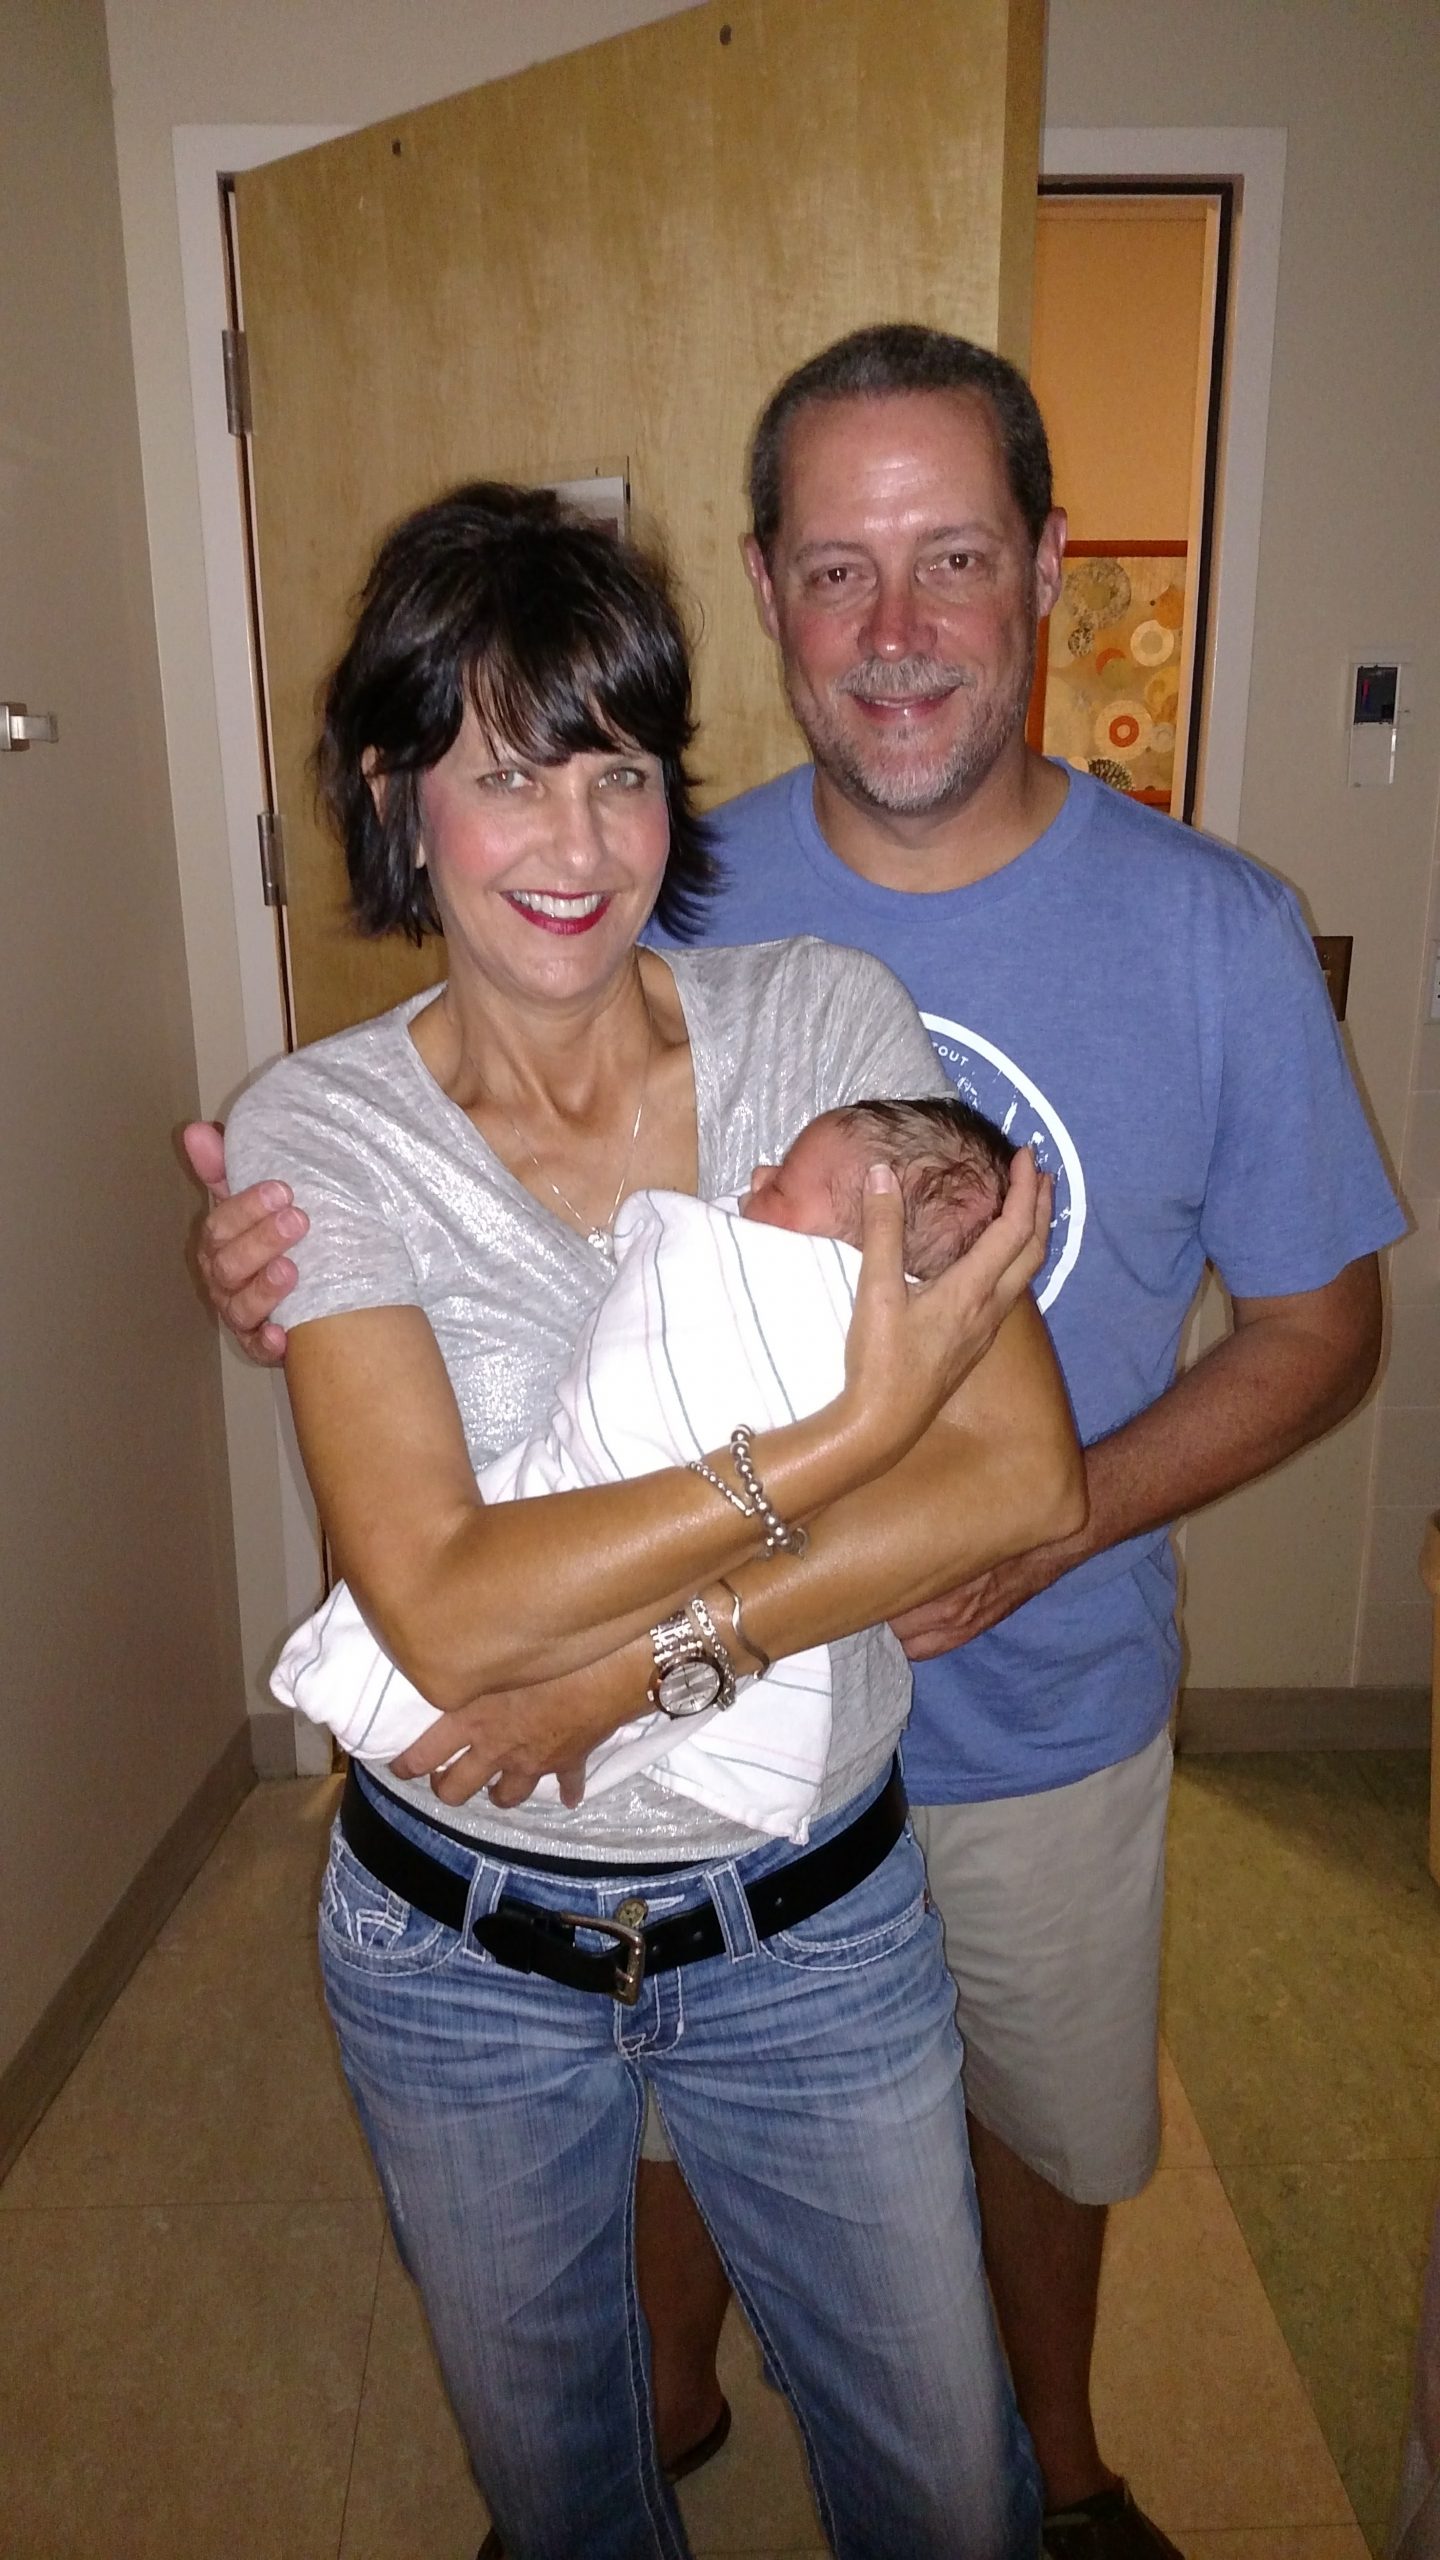 Patti Beaudoin with husband holding newborn baby in the hospital